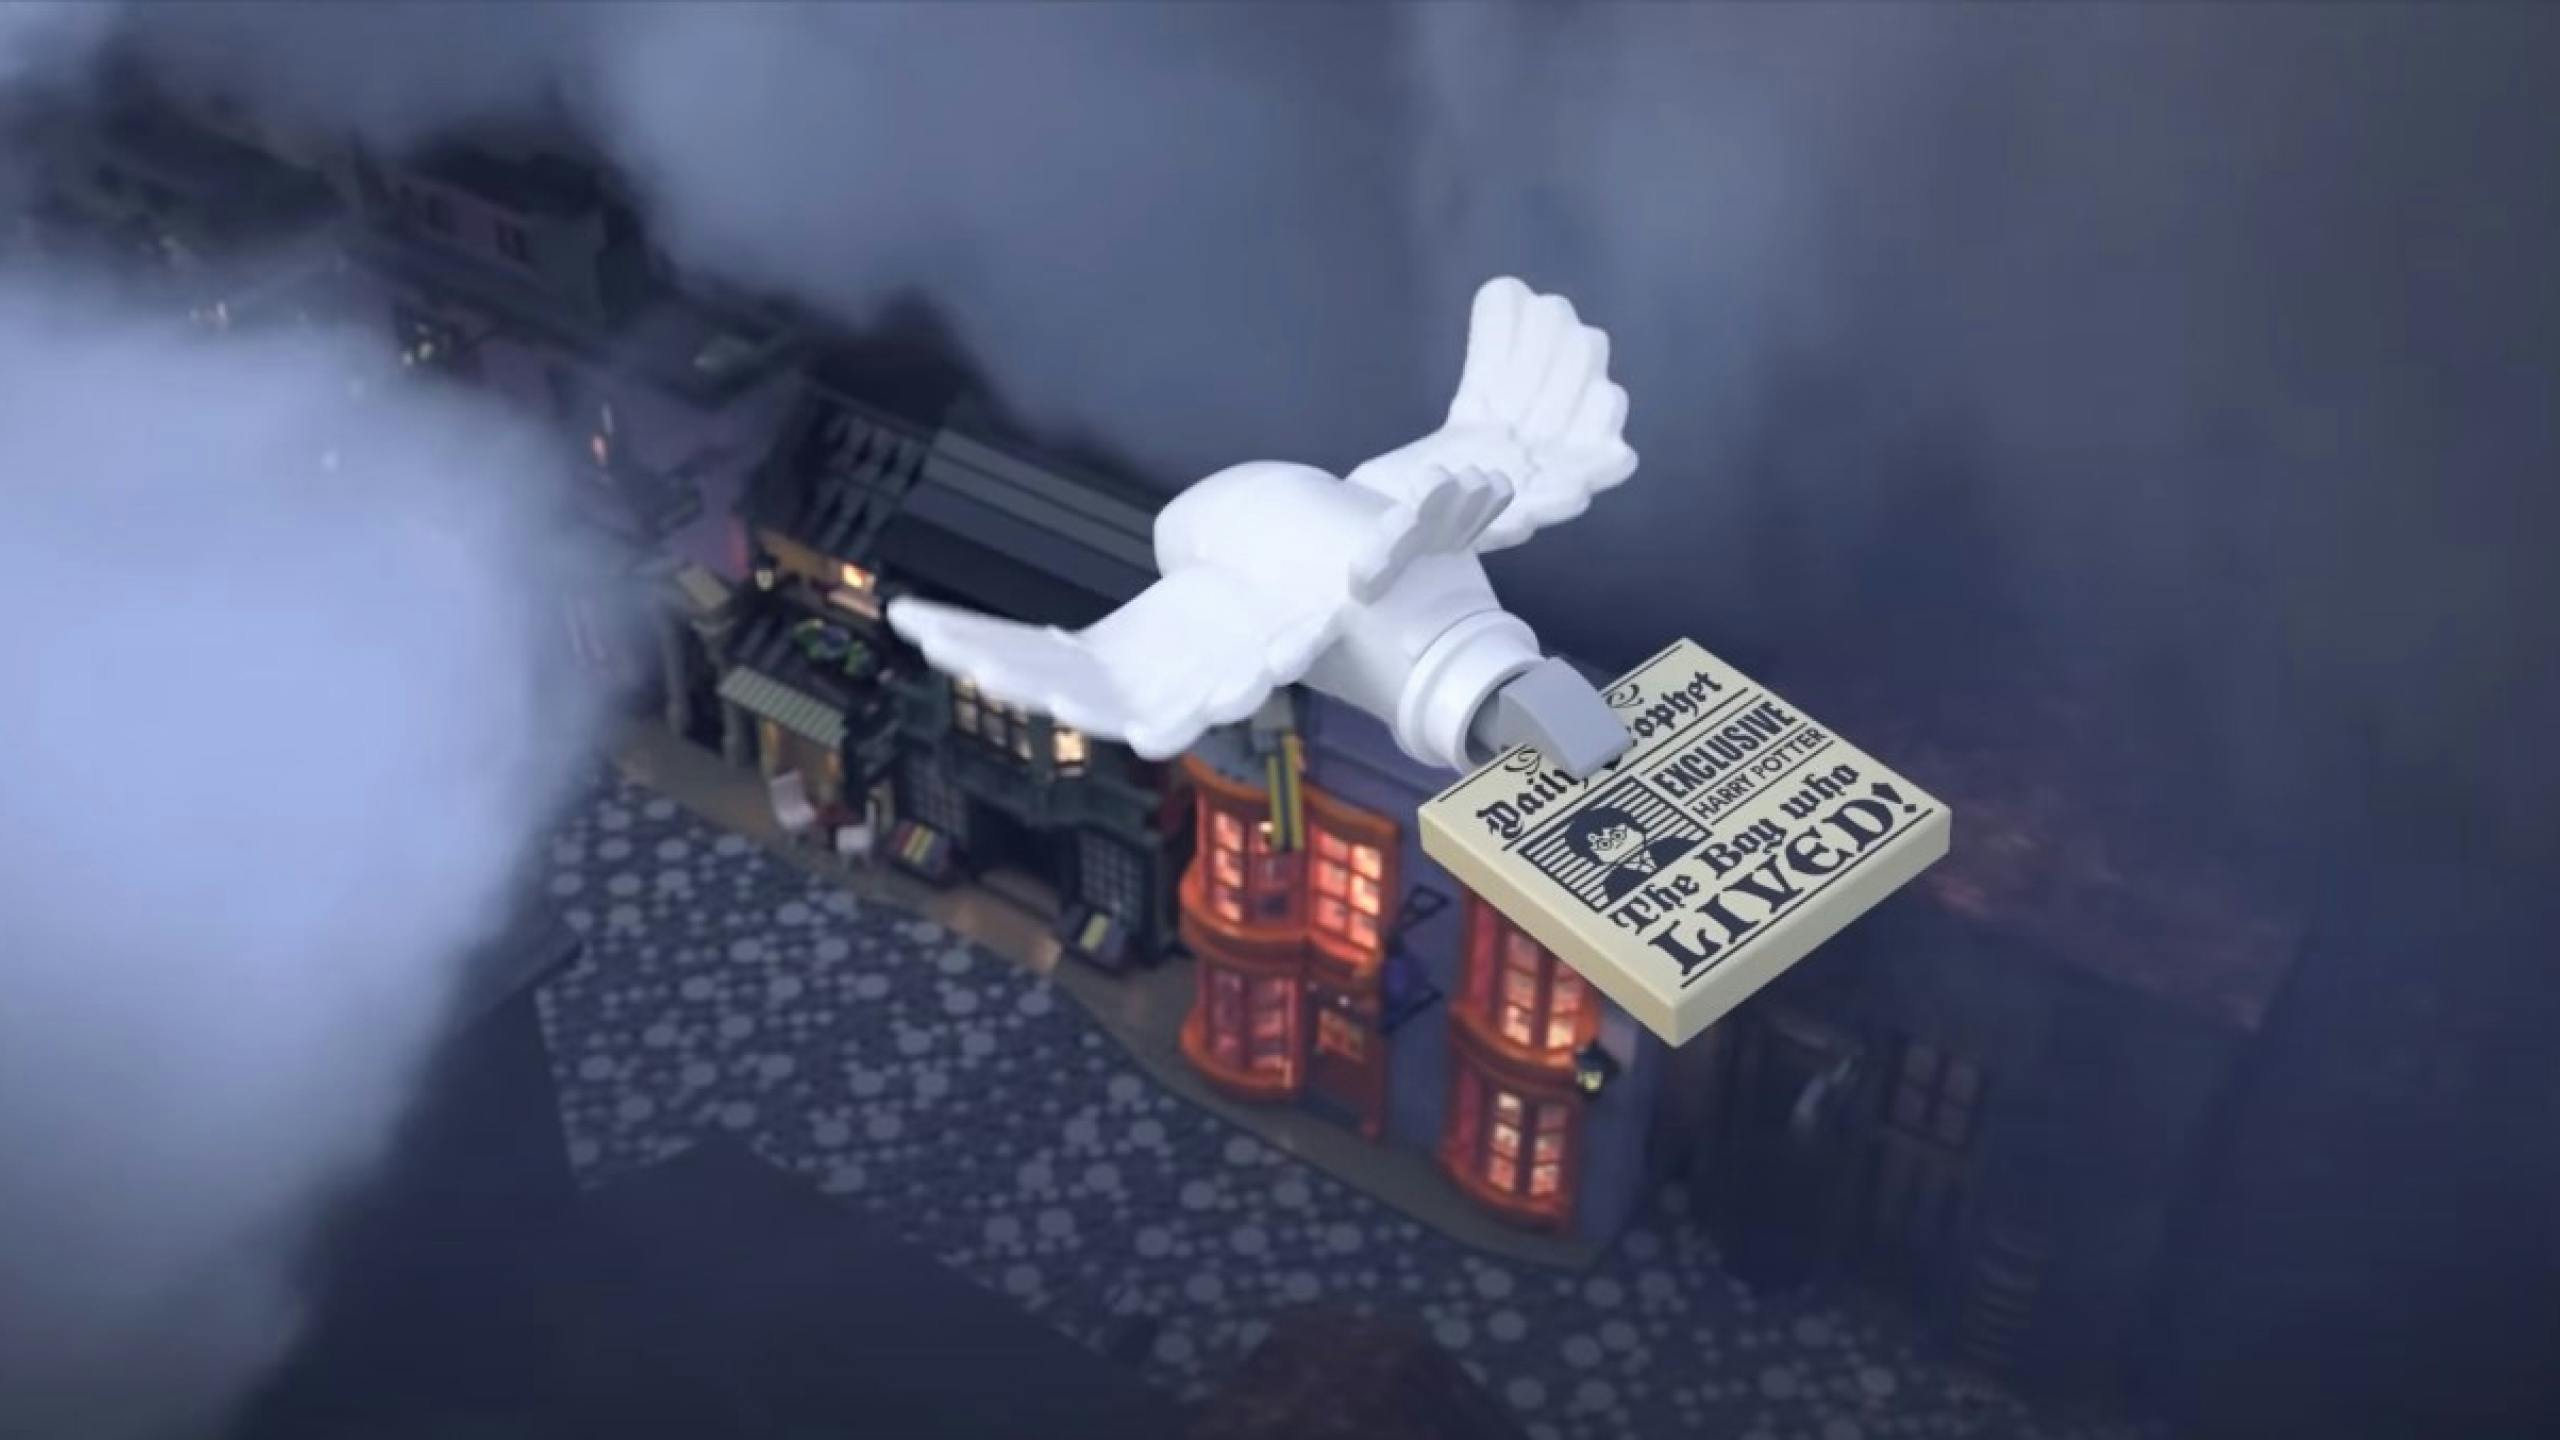 Extract of lego Hedwige flying with a newspaper